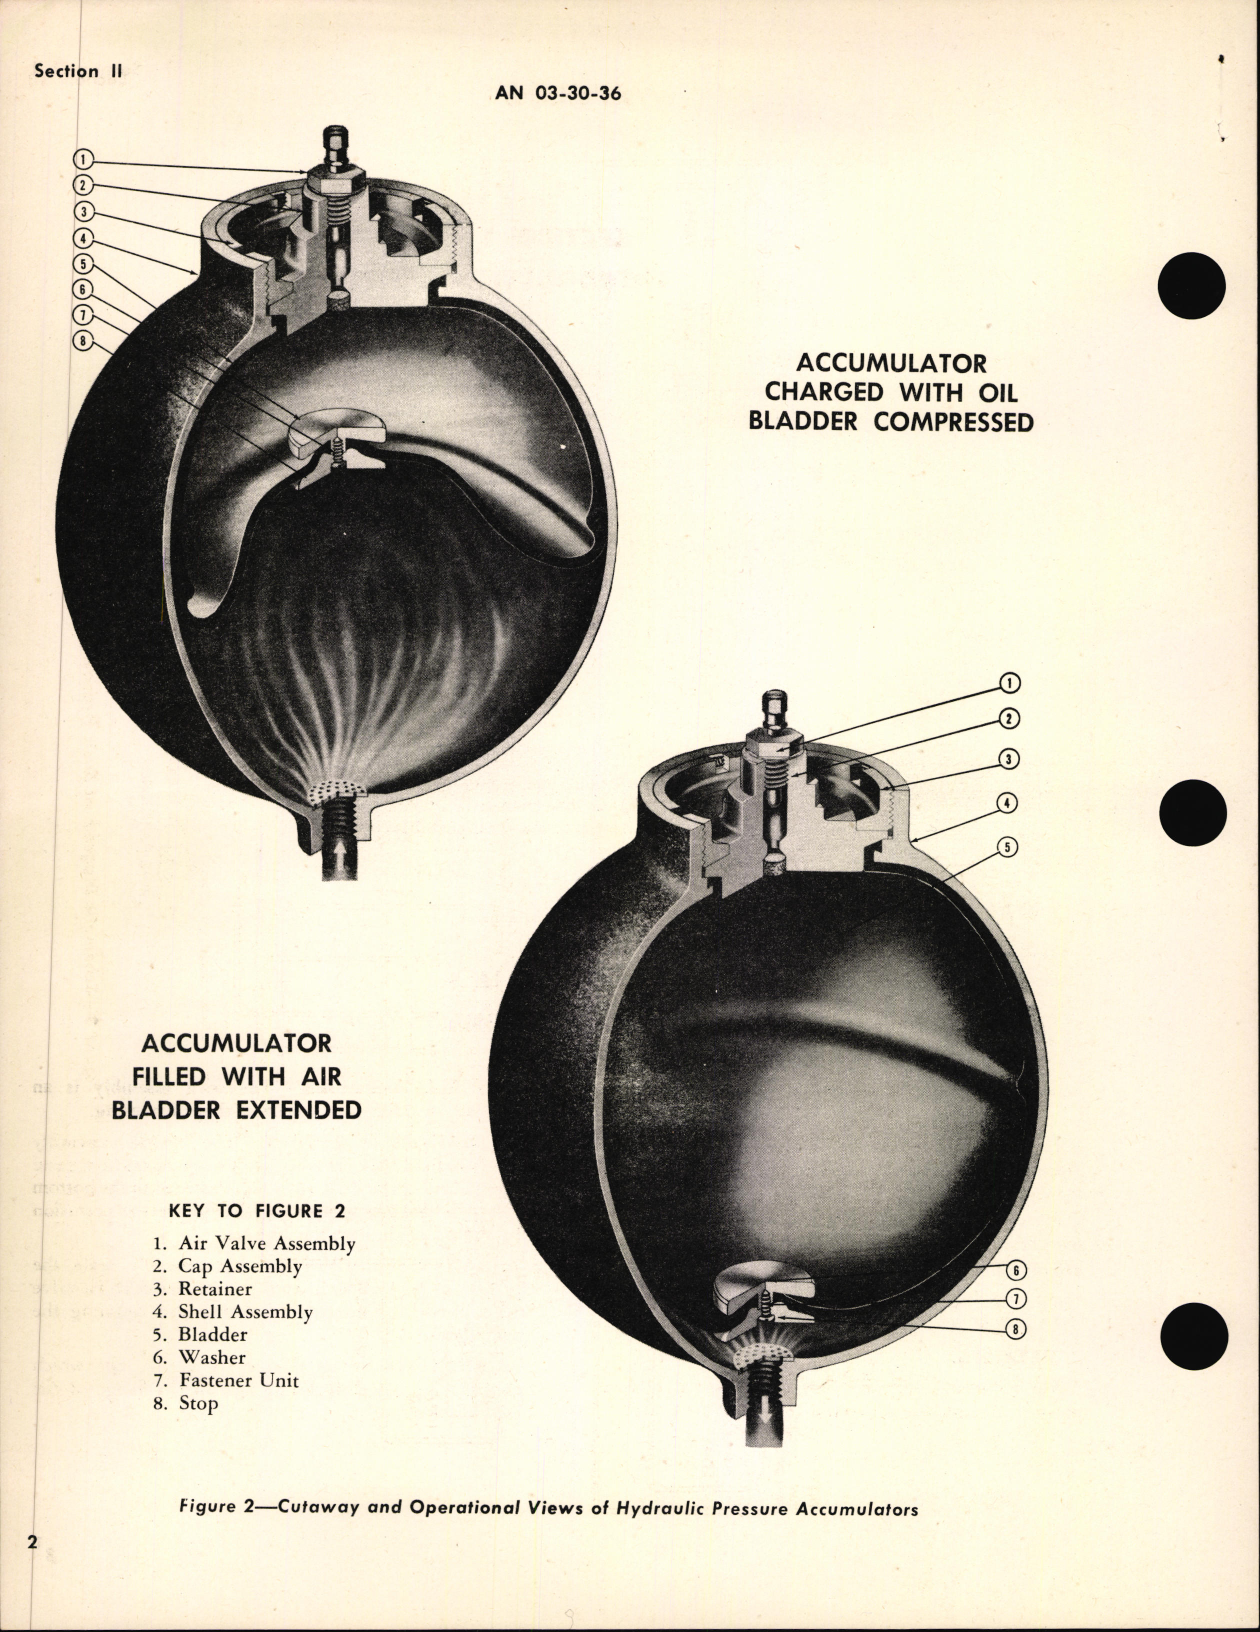 Sample page 6 from AirCorps Library document: Operation, Service and Overhaul Instructions With Parts Catalog For Hydraulic Pressure Accumulators